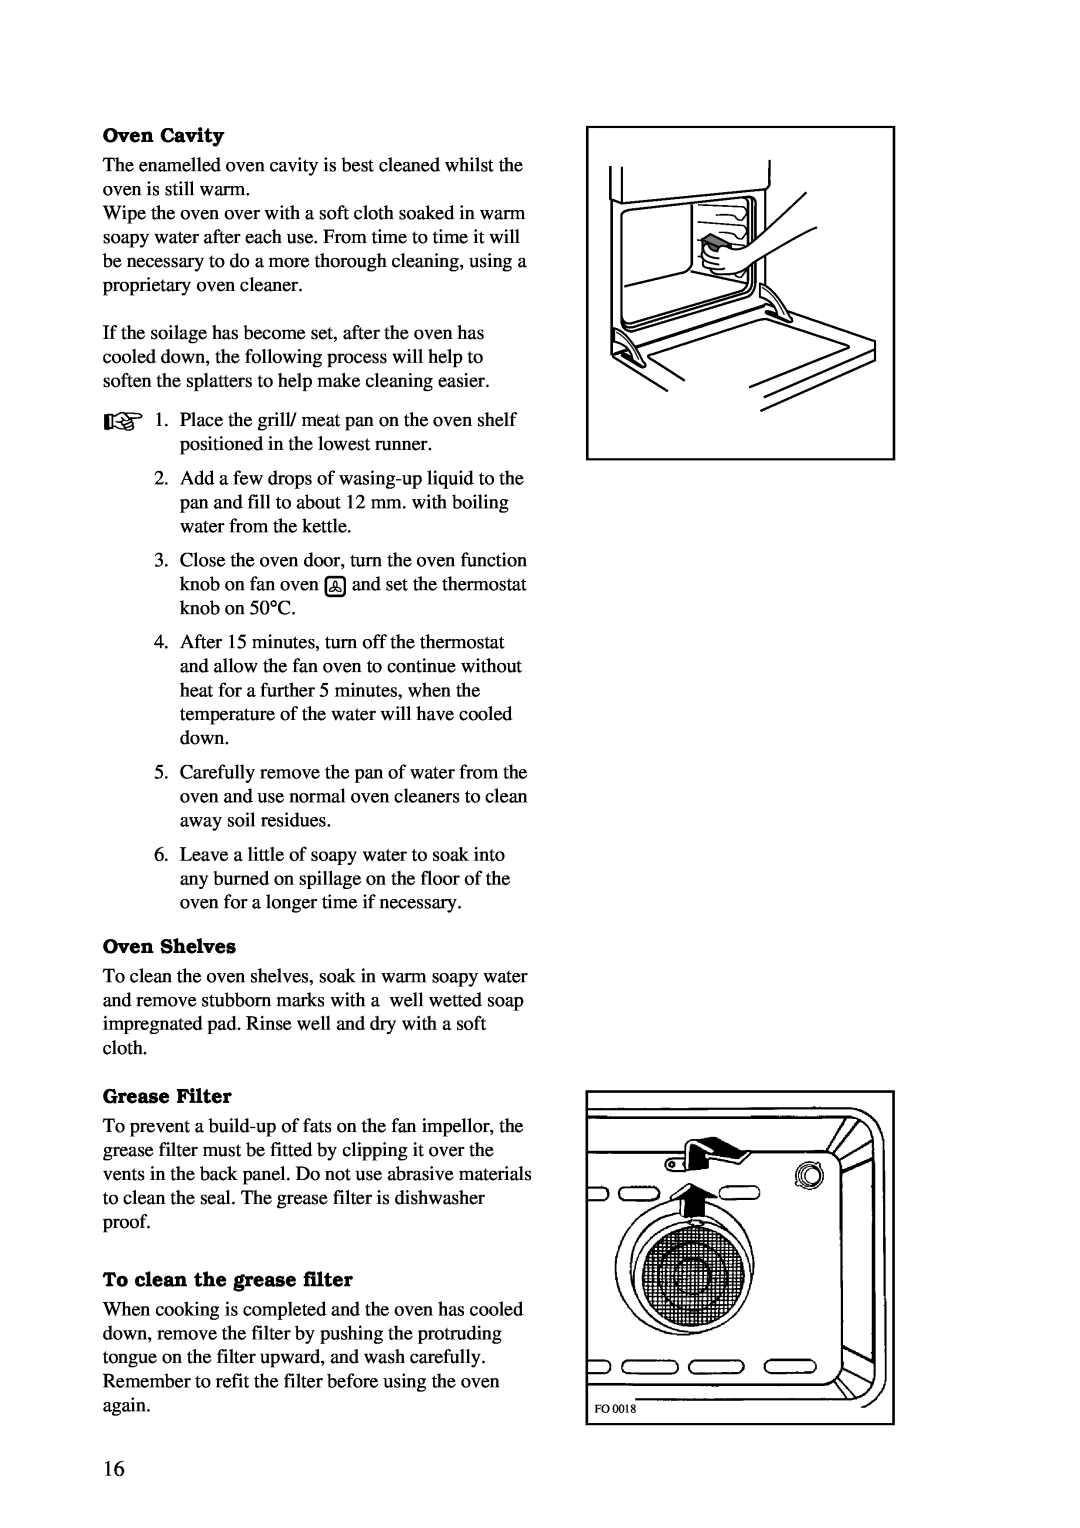 Zanussi ZBF 760 installation manual Oven Cavity, Oven Shelves, Grease Filter, To clean the grease filter 